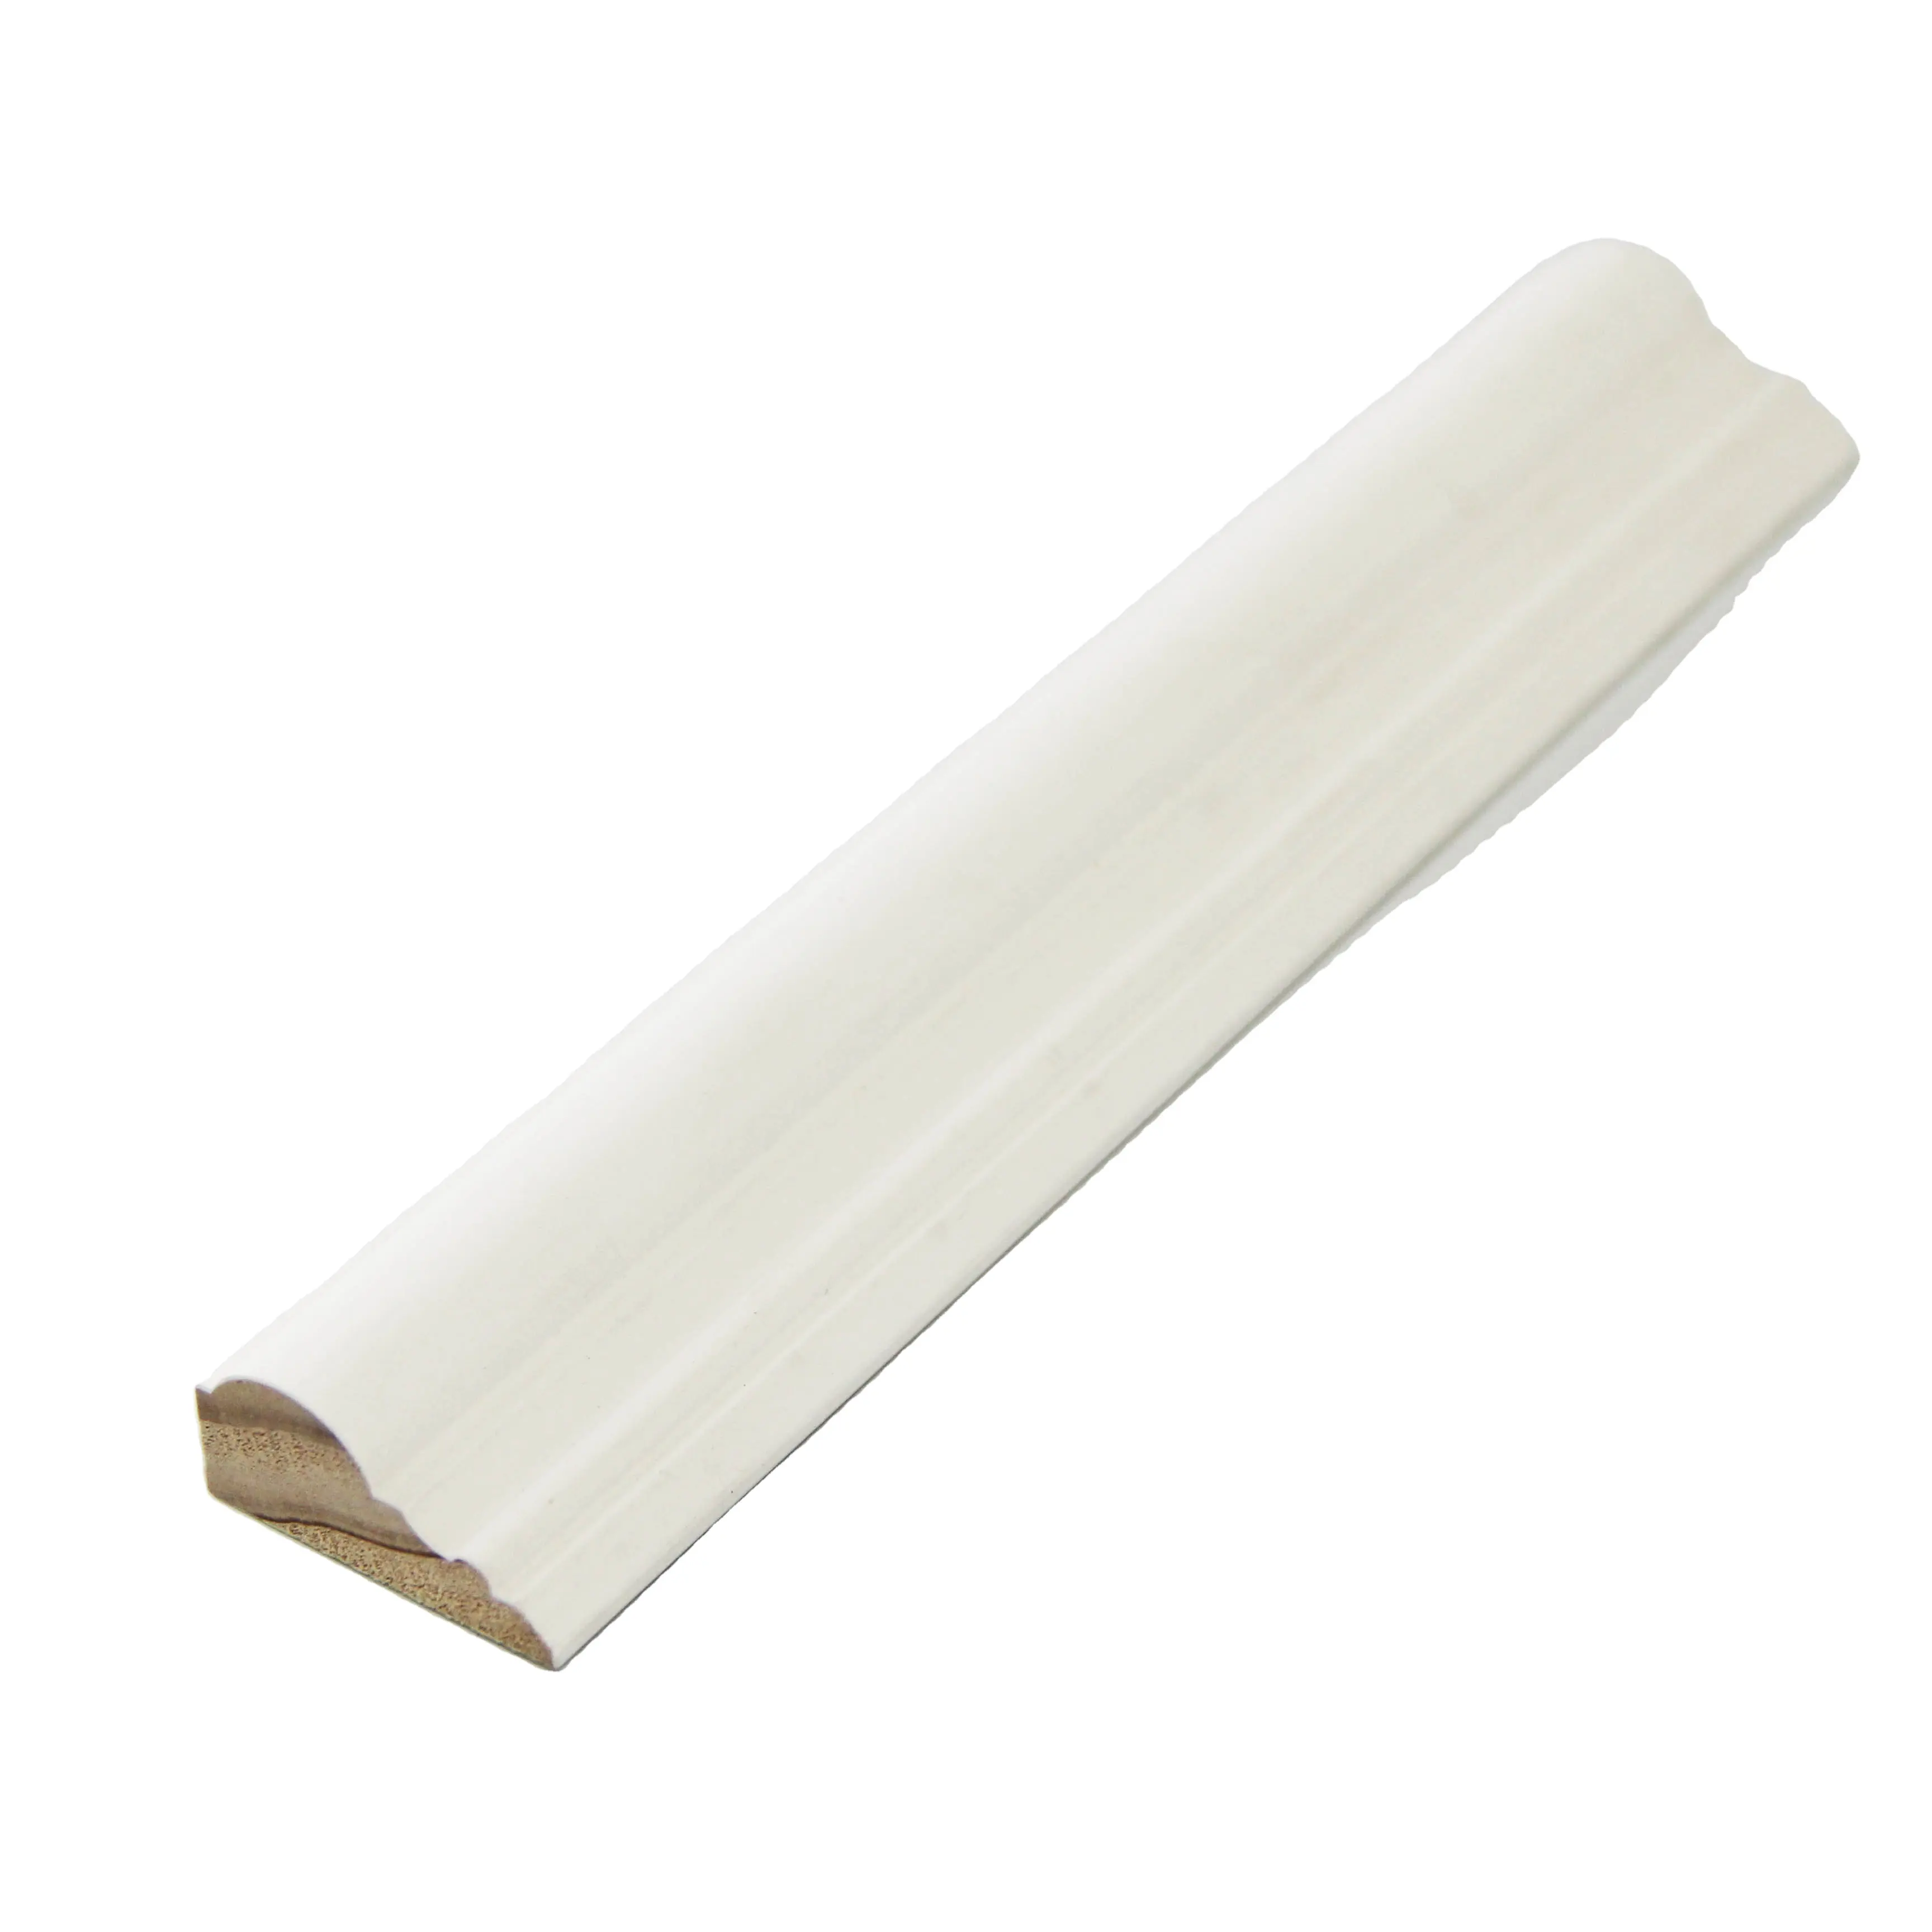 Skirting Board China High Quality White Gesso Primed Soild Wood Wall Skirting Board Baseboard